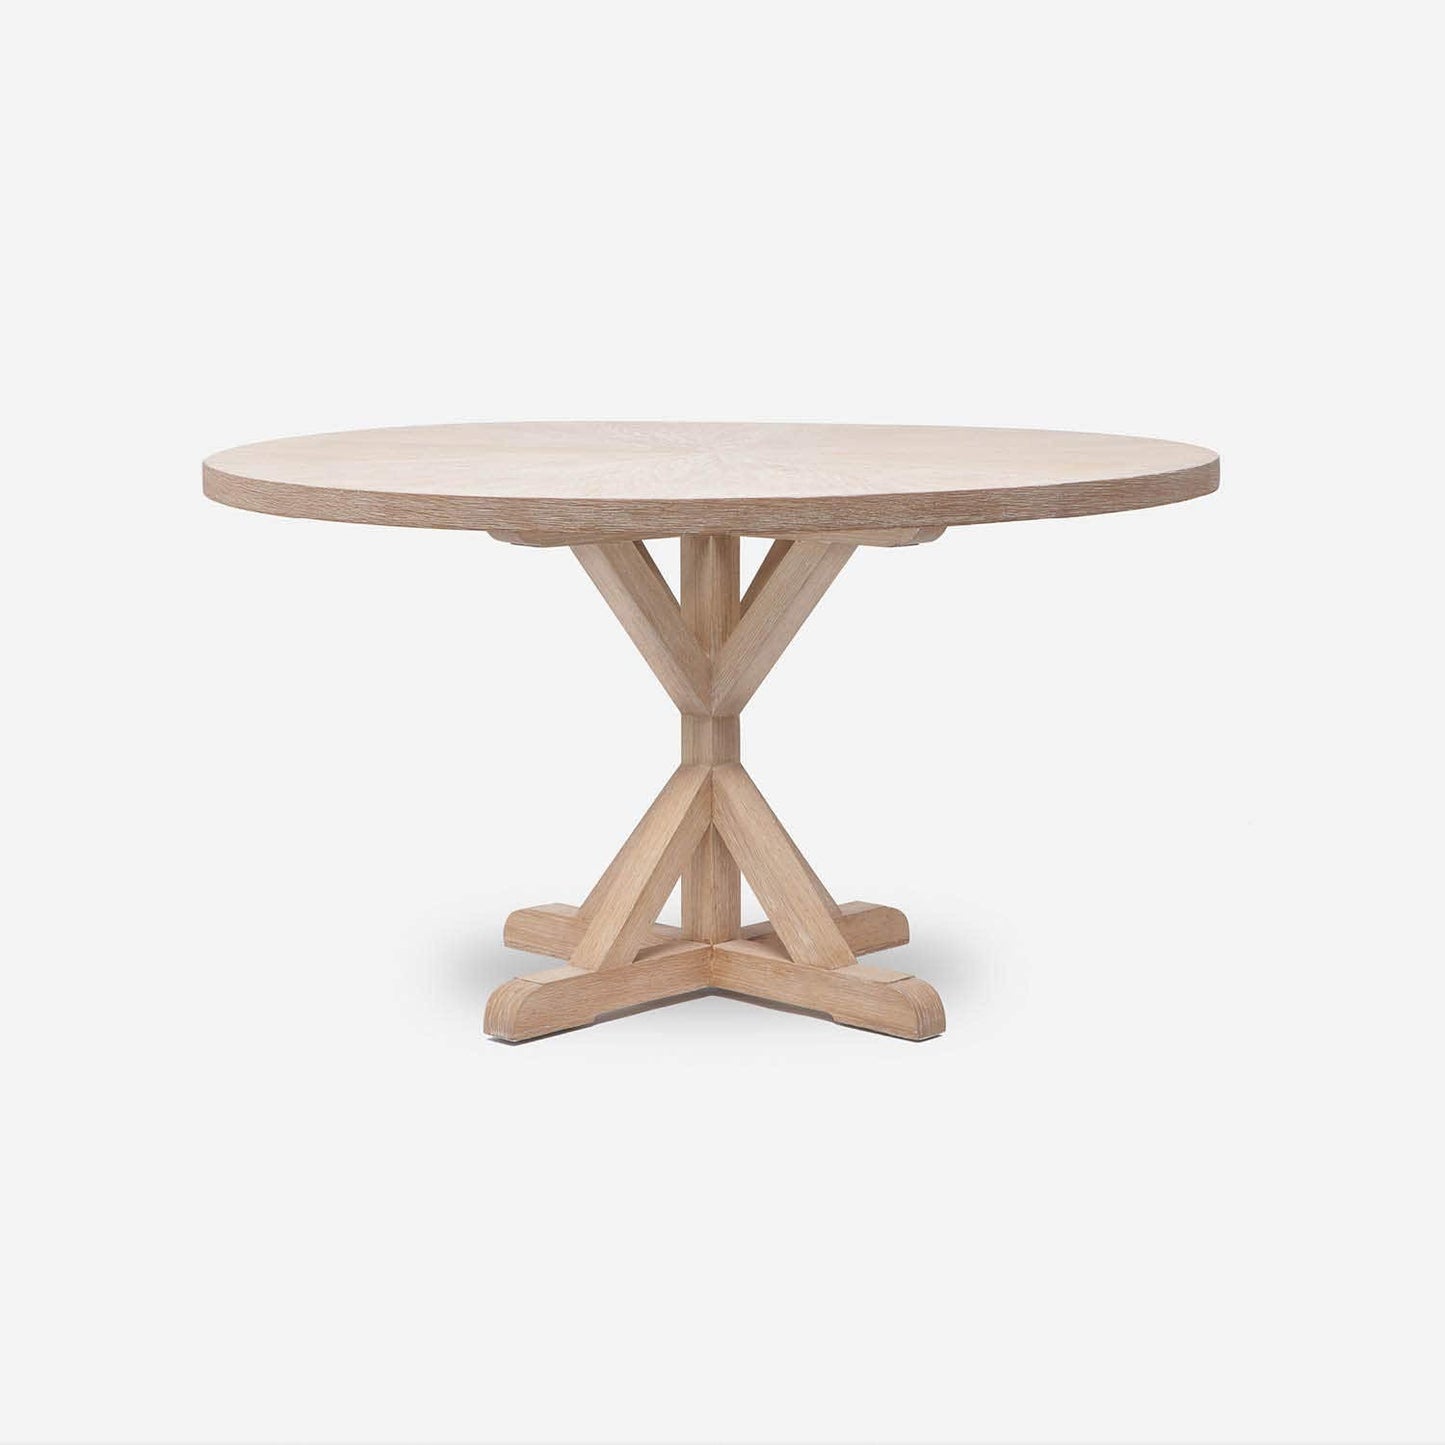 Made Goods Dane 60" x 30" White Cerused Oak Dinning Table With Round White Cerused Oak Table Top